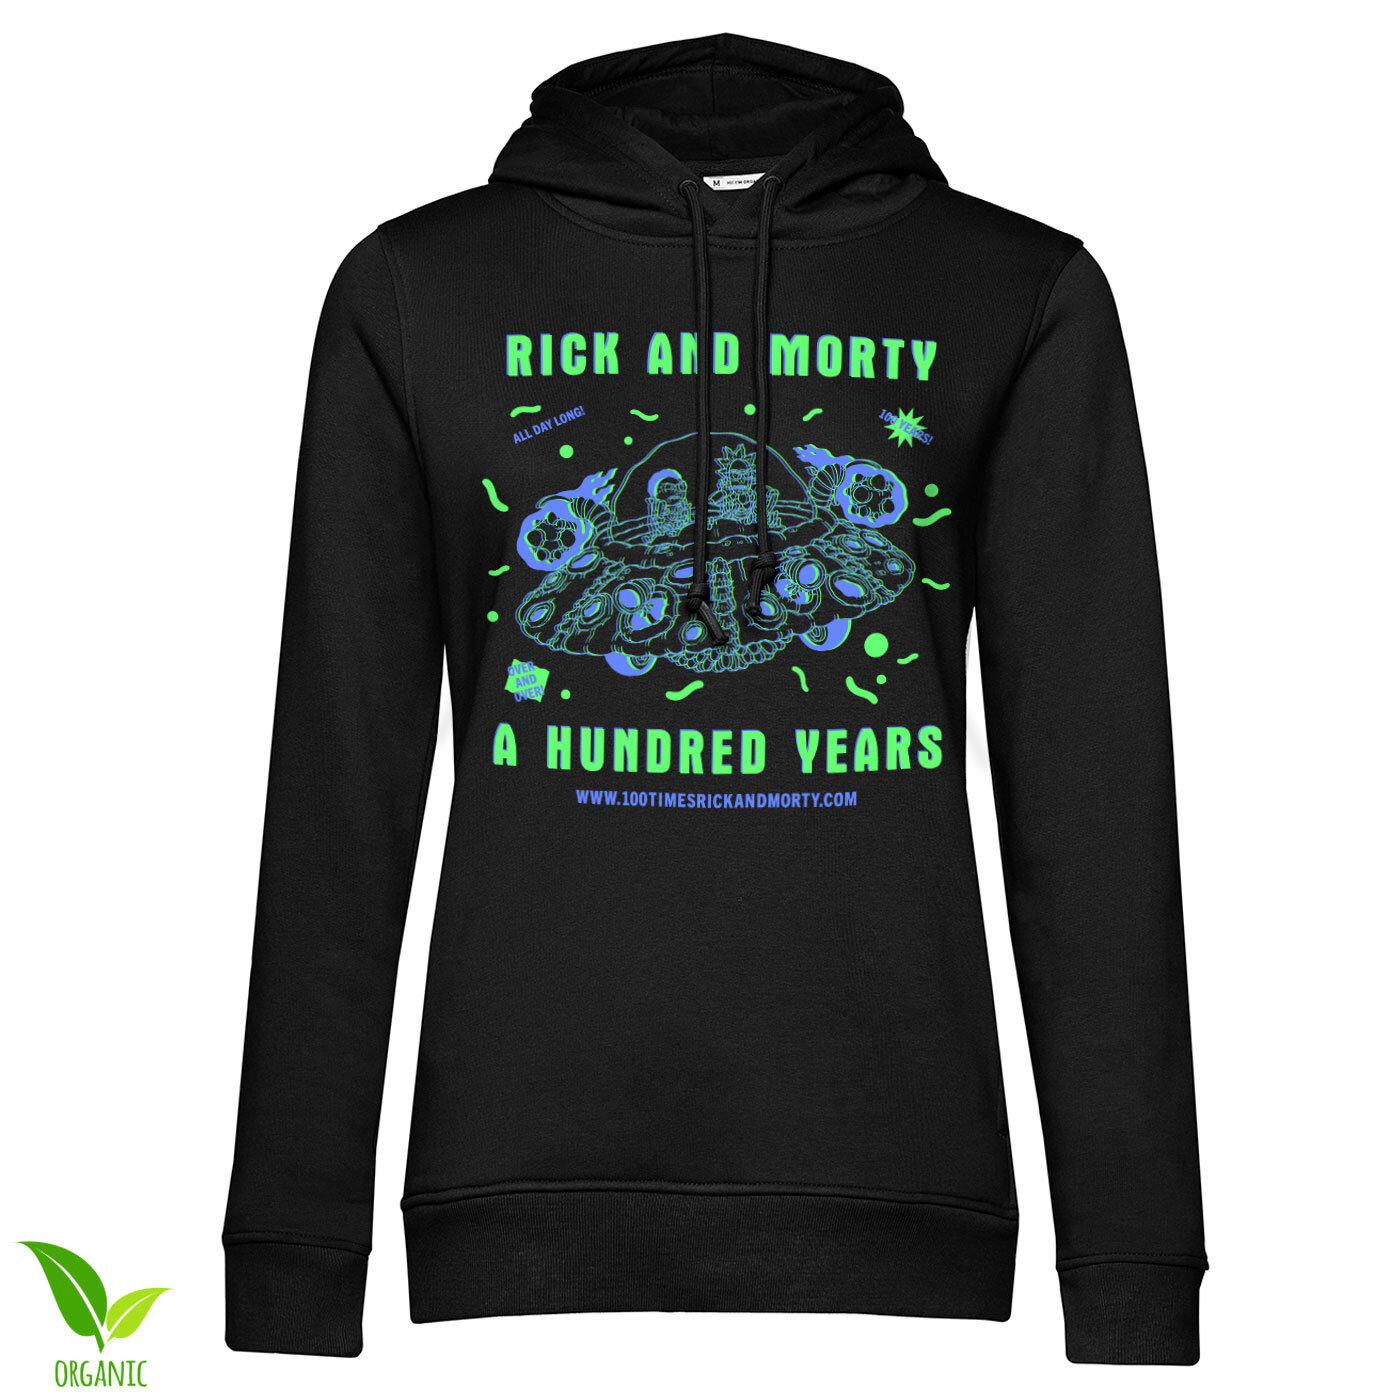 Rick And Morty - A Hundred Years Girls Hoodie